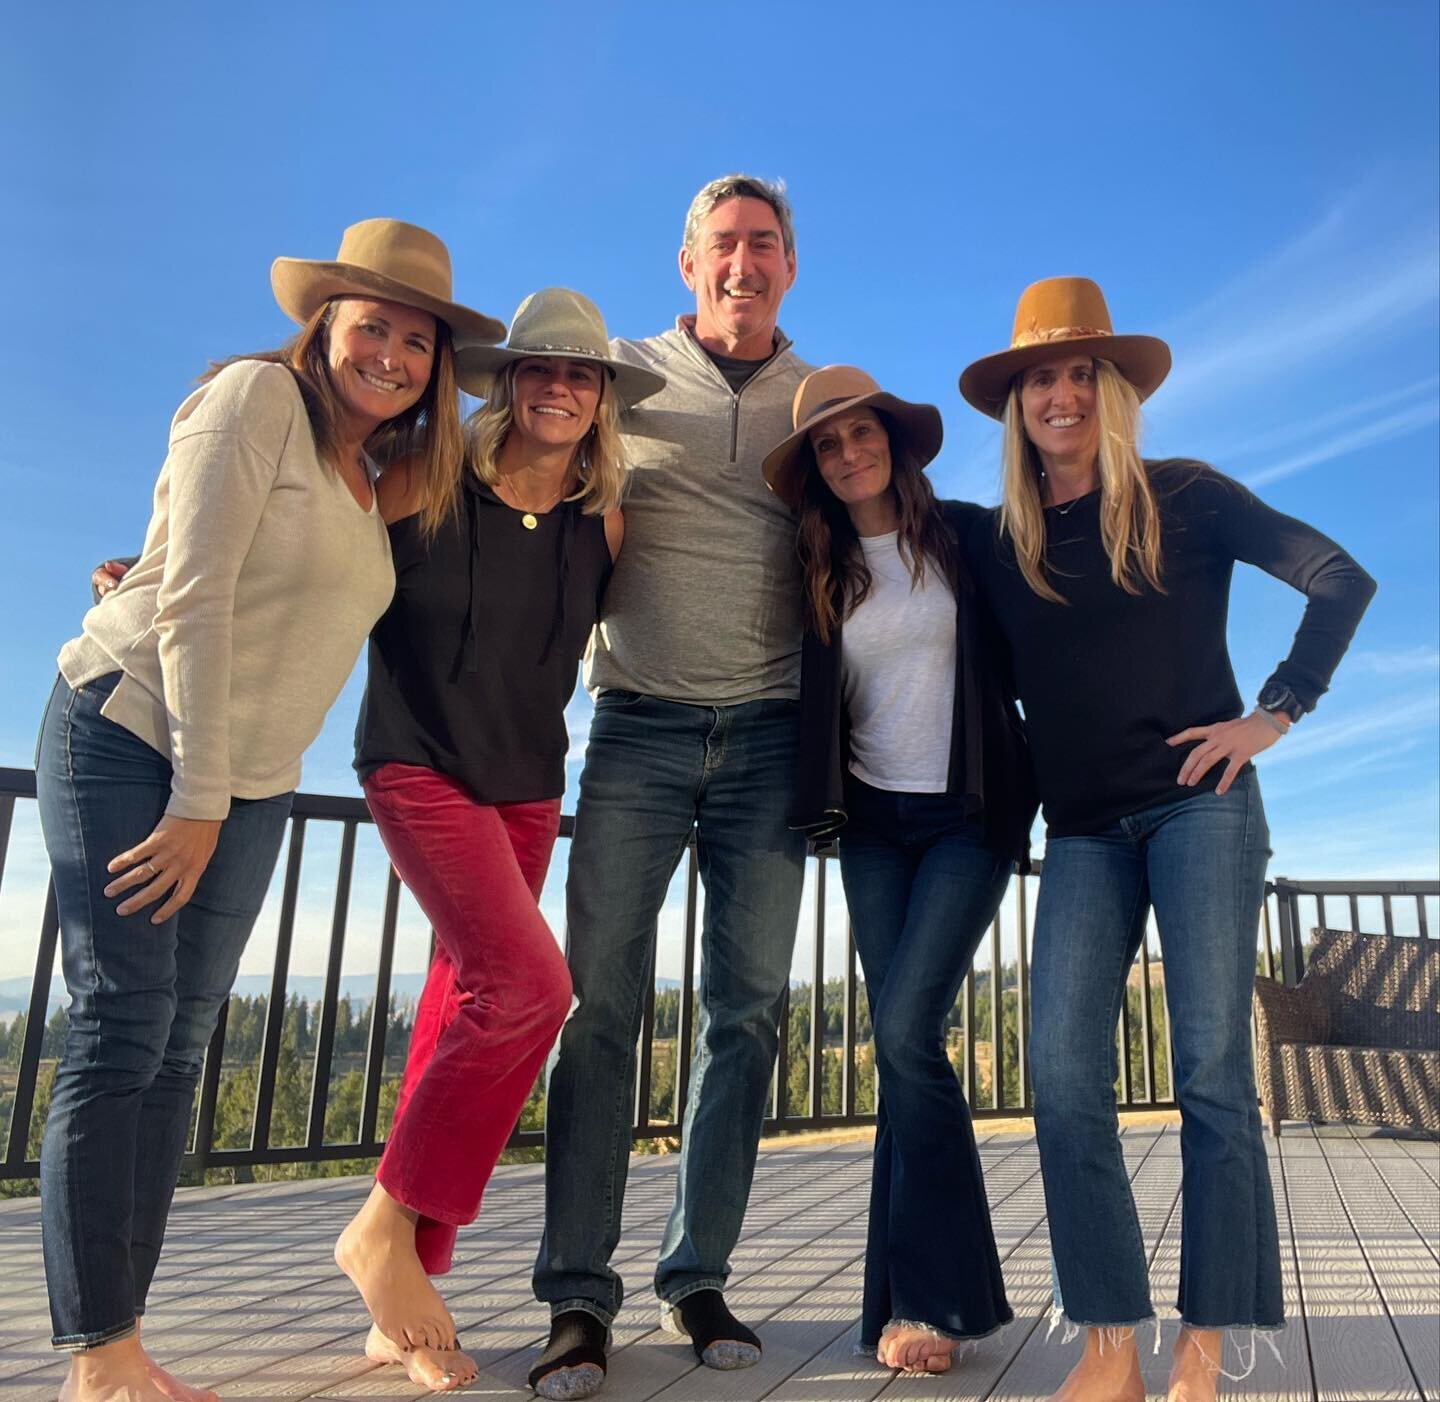 The girls&mdash;and the luckiest man in Montana. (Thanks for hosting, Stretch!)